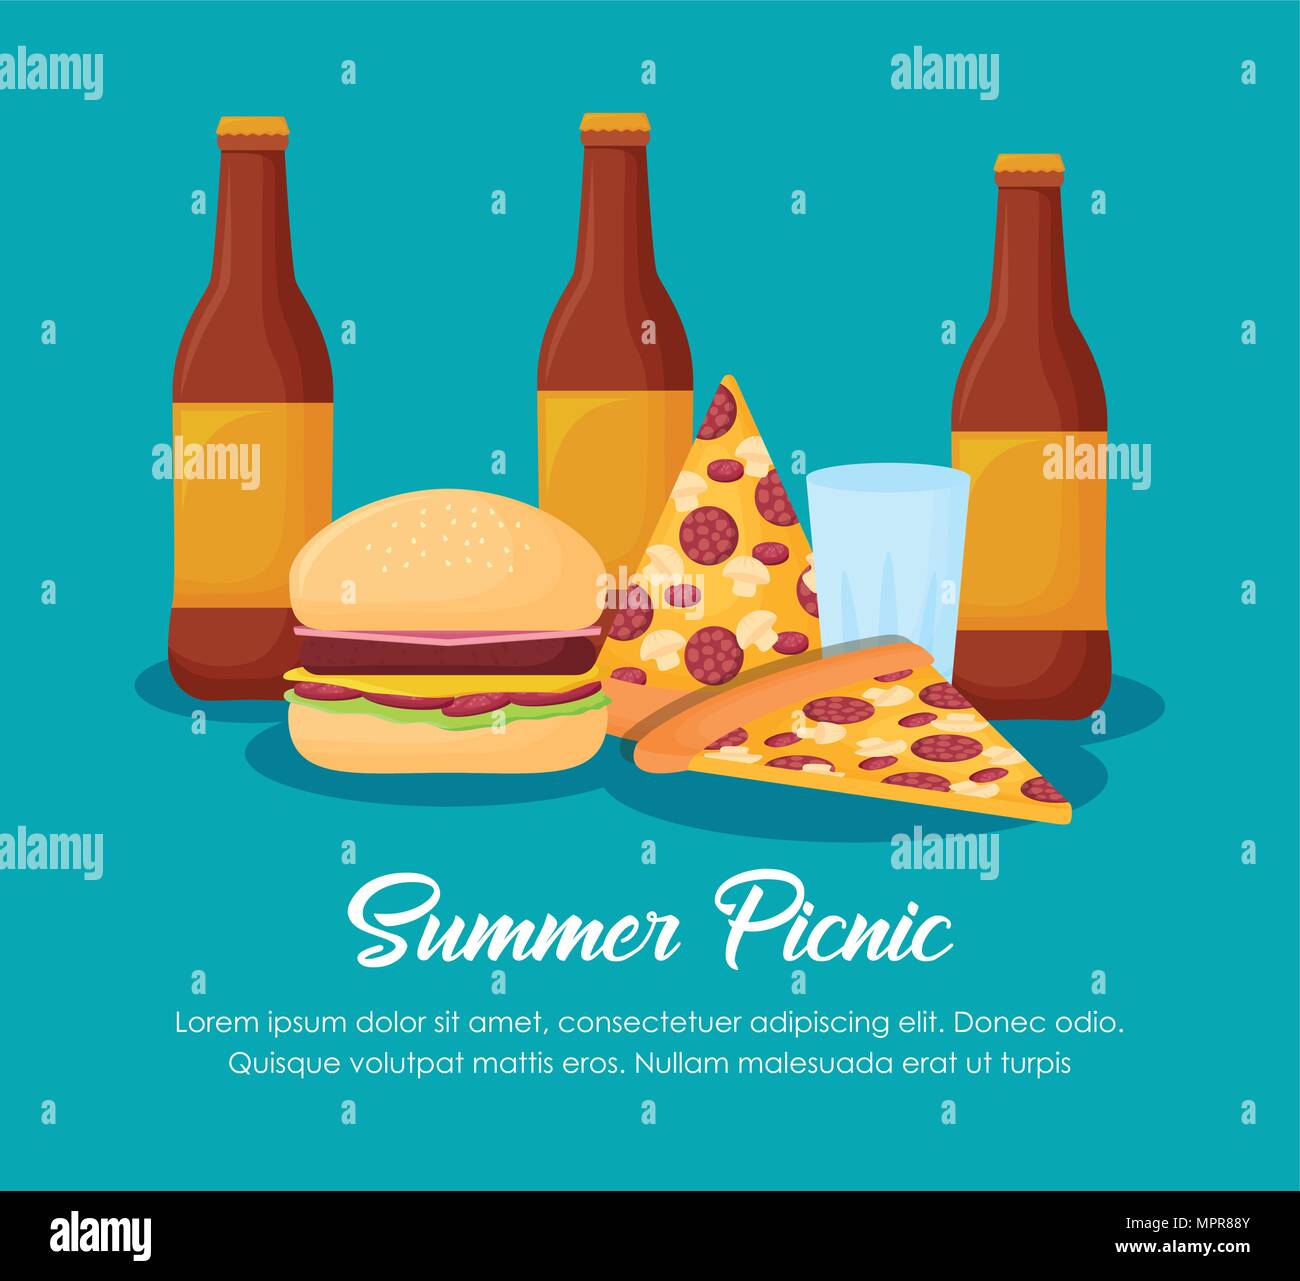 picnic summer design with beer bottles and pizzas over blue background, colorful design. vector illustration Stock Vector